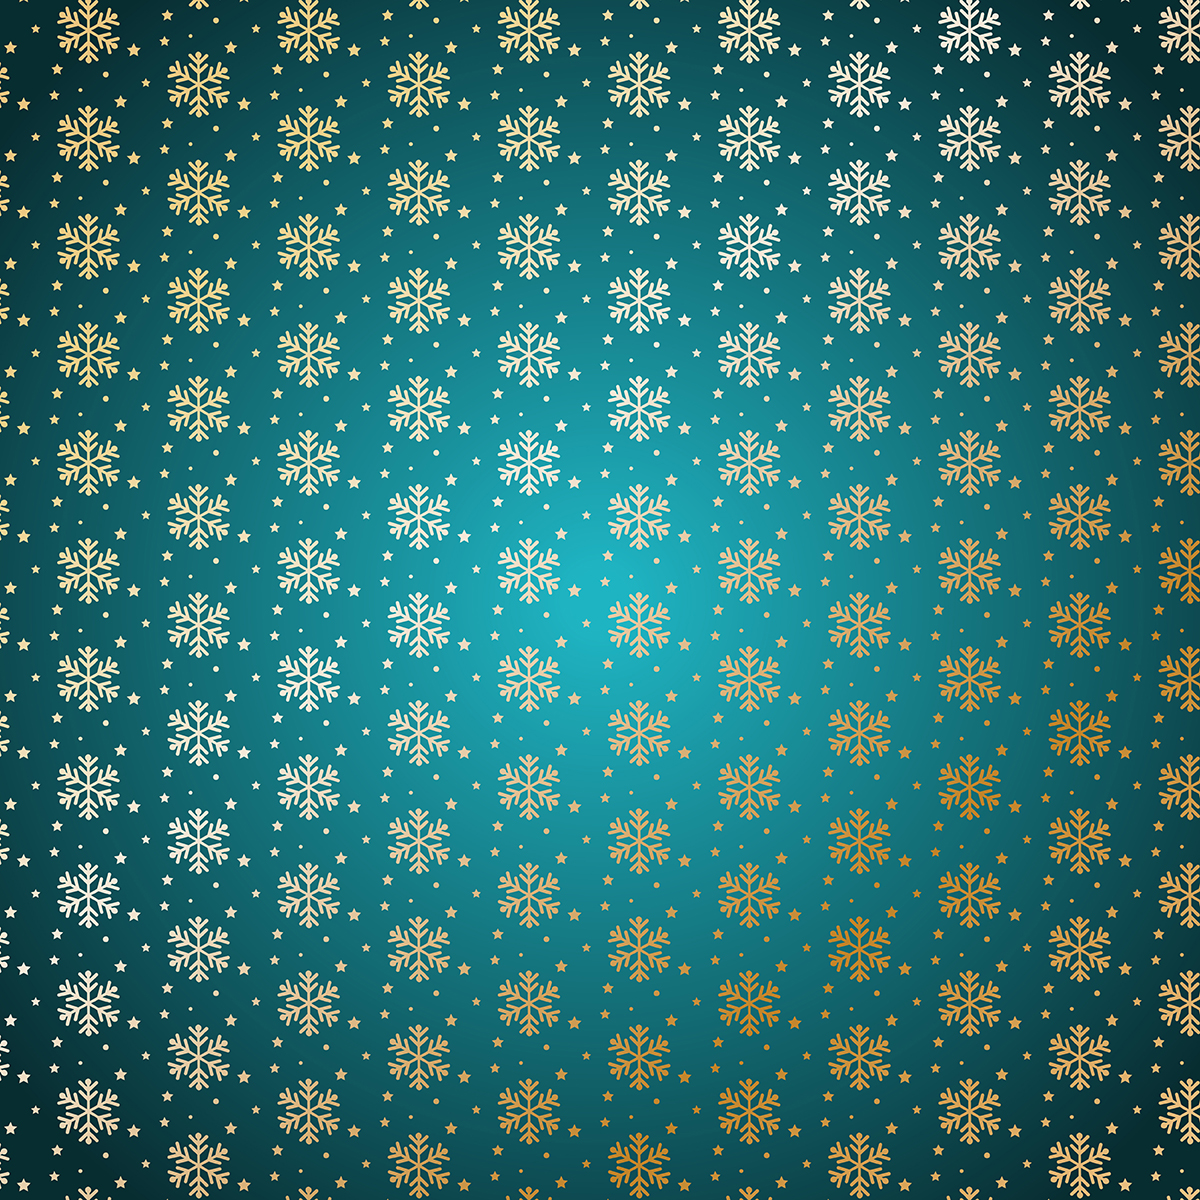 Wallpapers texture background snowflakes on the desktop